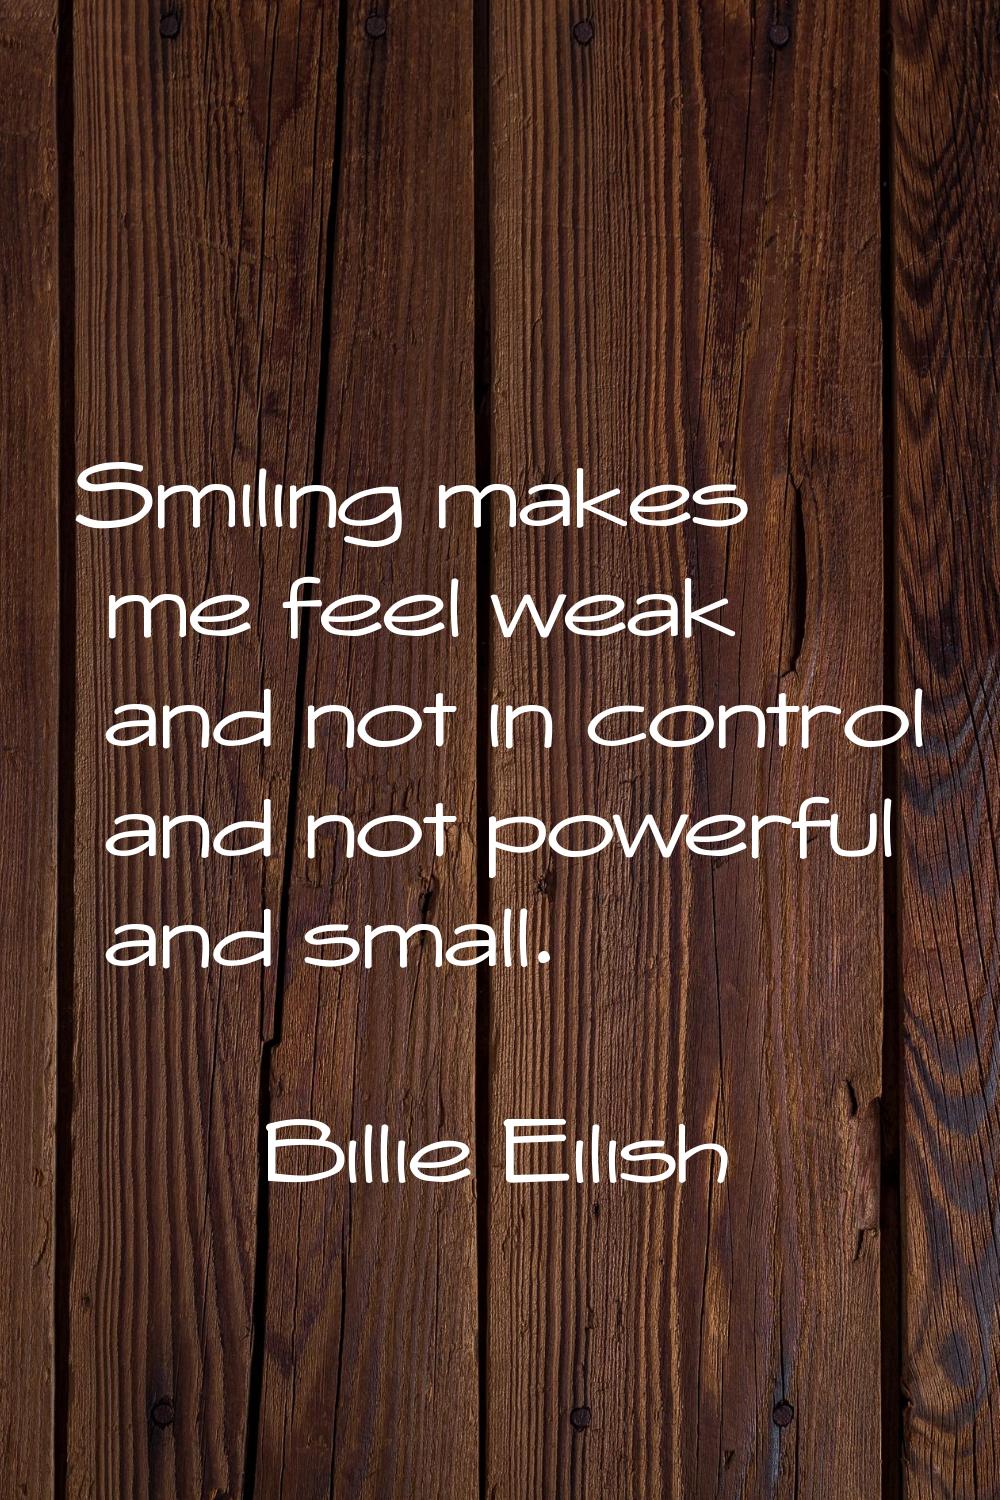 Smiling makes me feel weak and not in control and not powerful and small.